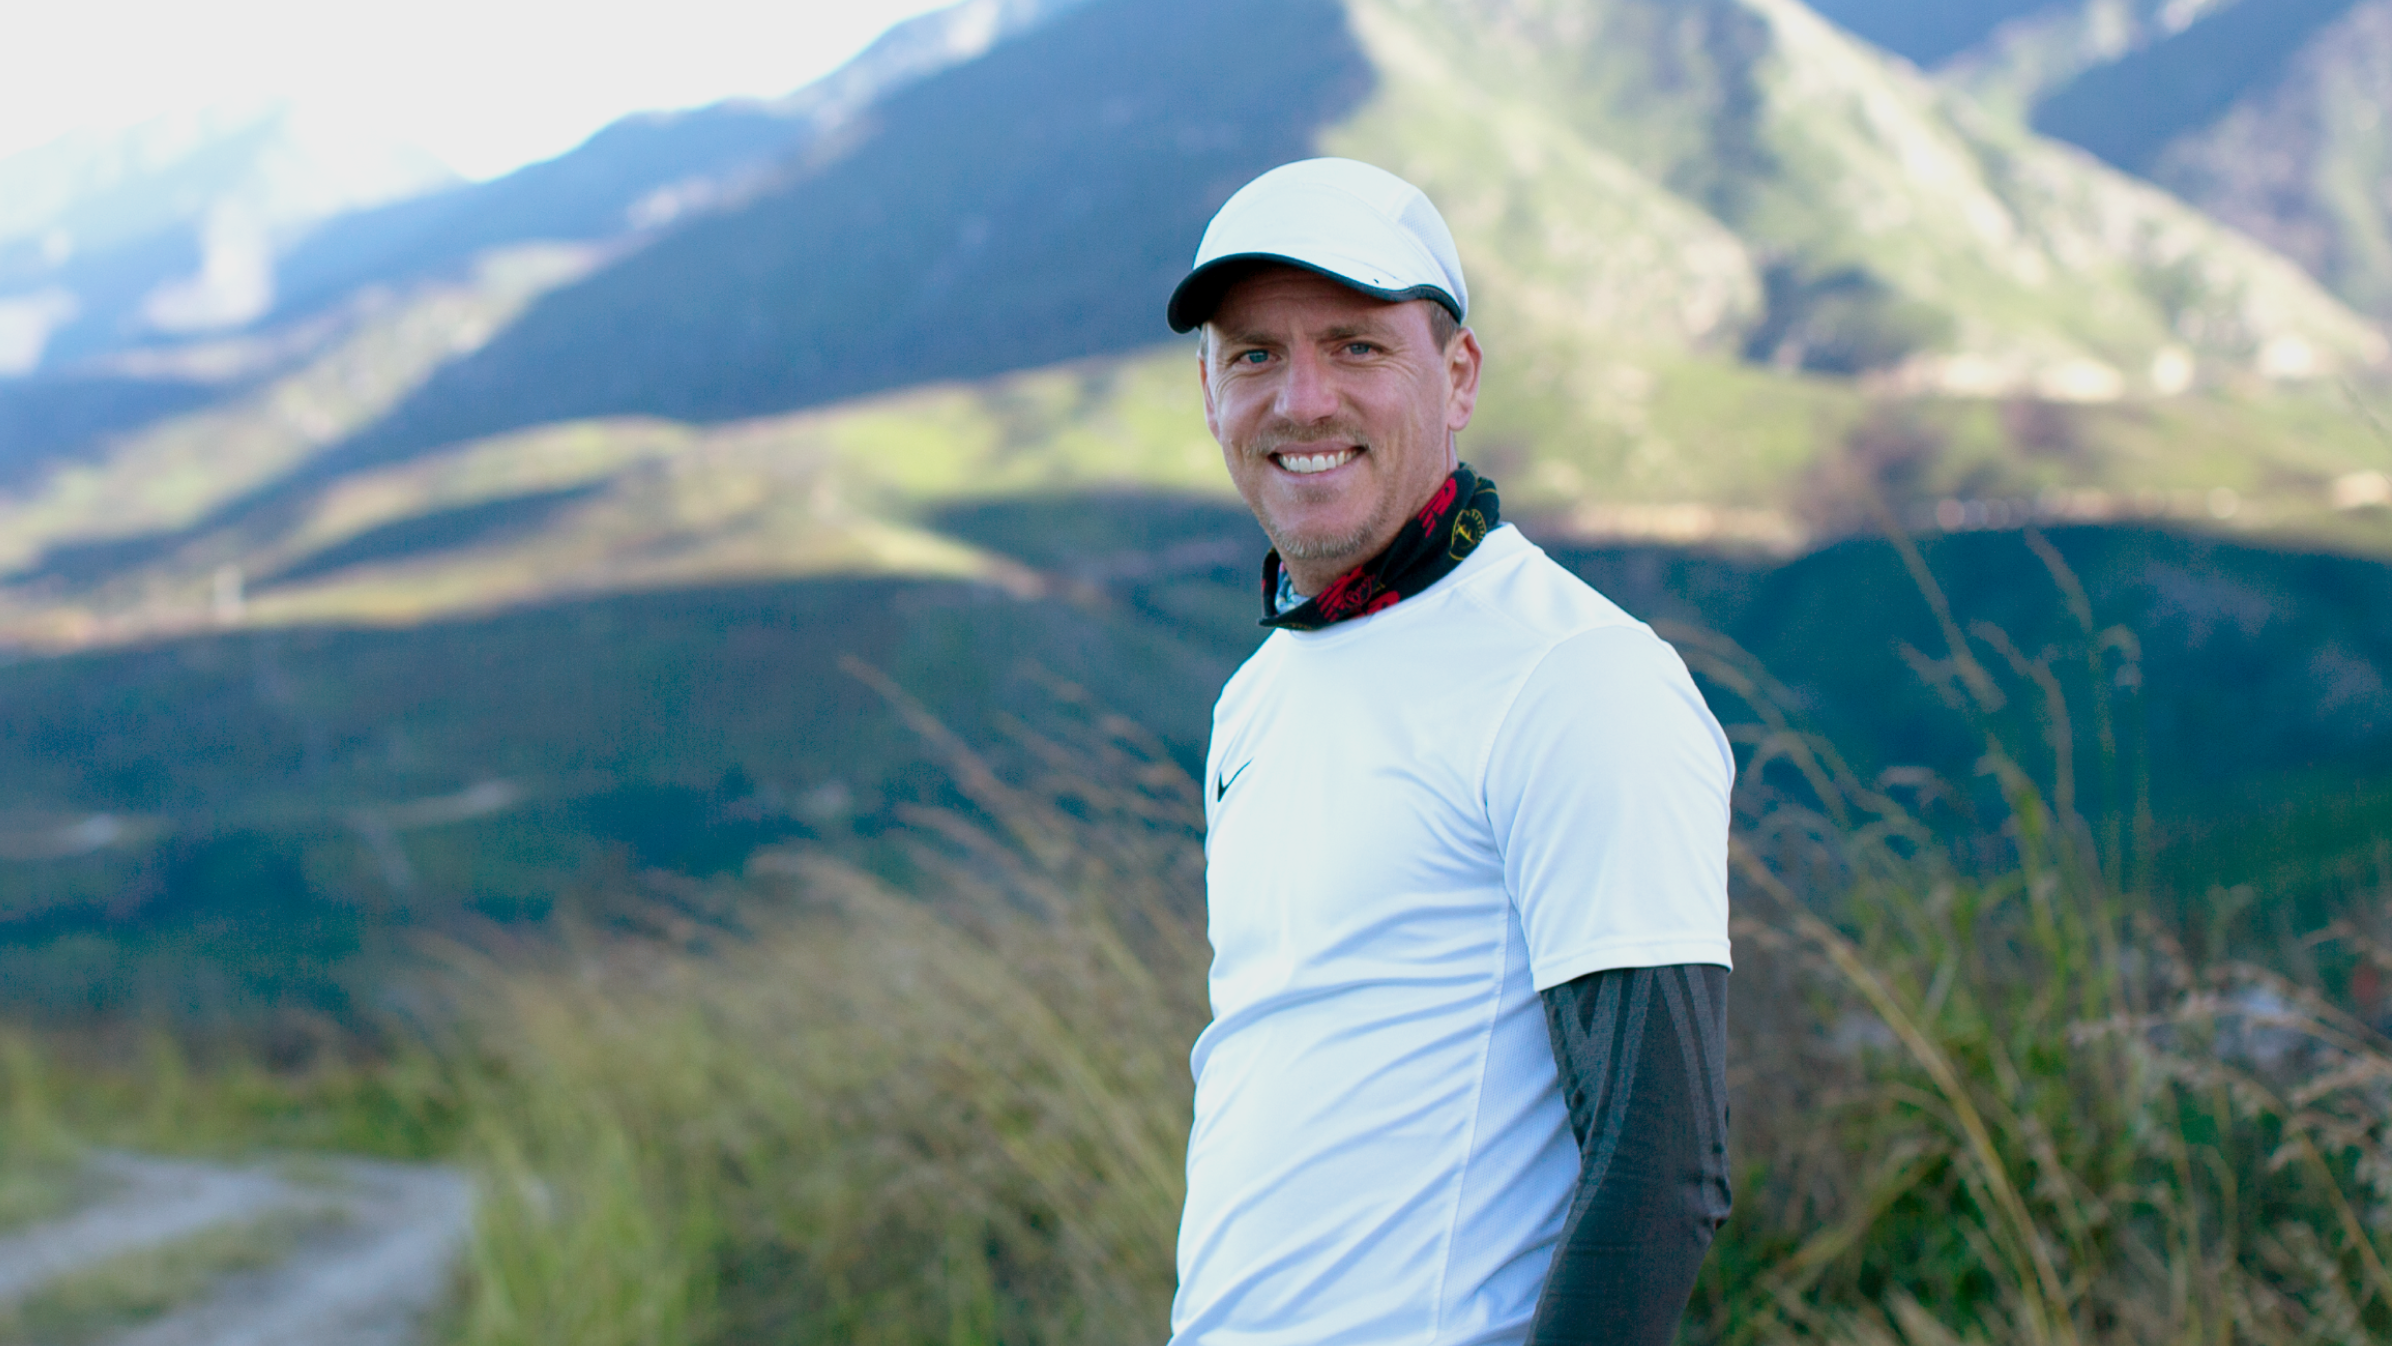 Willem Haarhoff, co-founder of DoughGetters accounting firm, stands in front of a mountain backdrop wearing sports clothing.